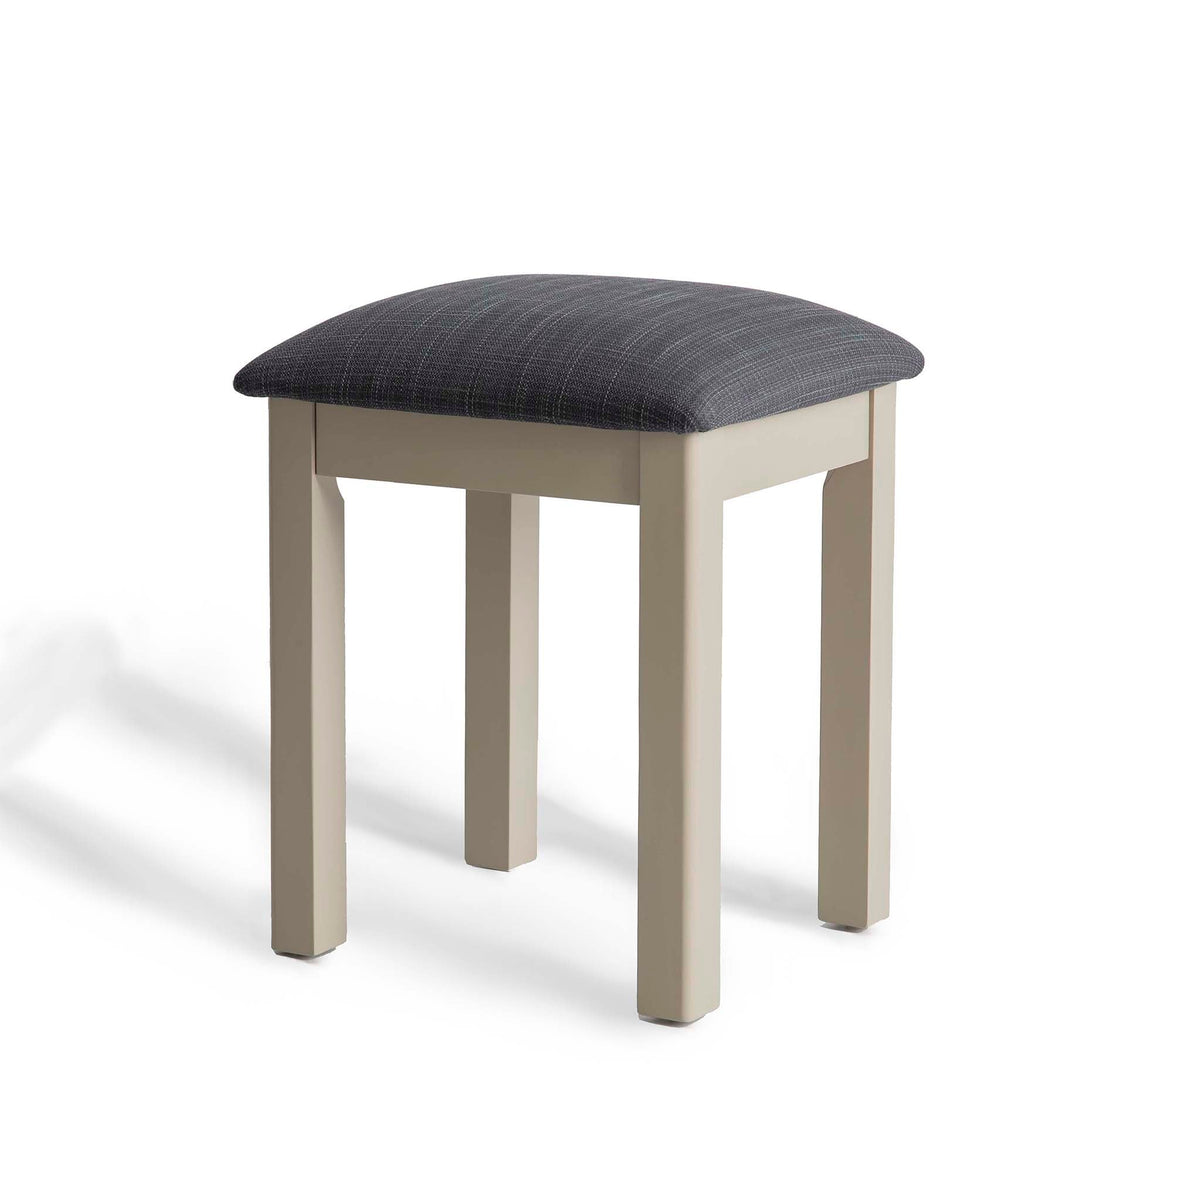 The Padstow Stone Grey Dressing Table Stool  - Side view